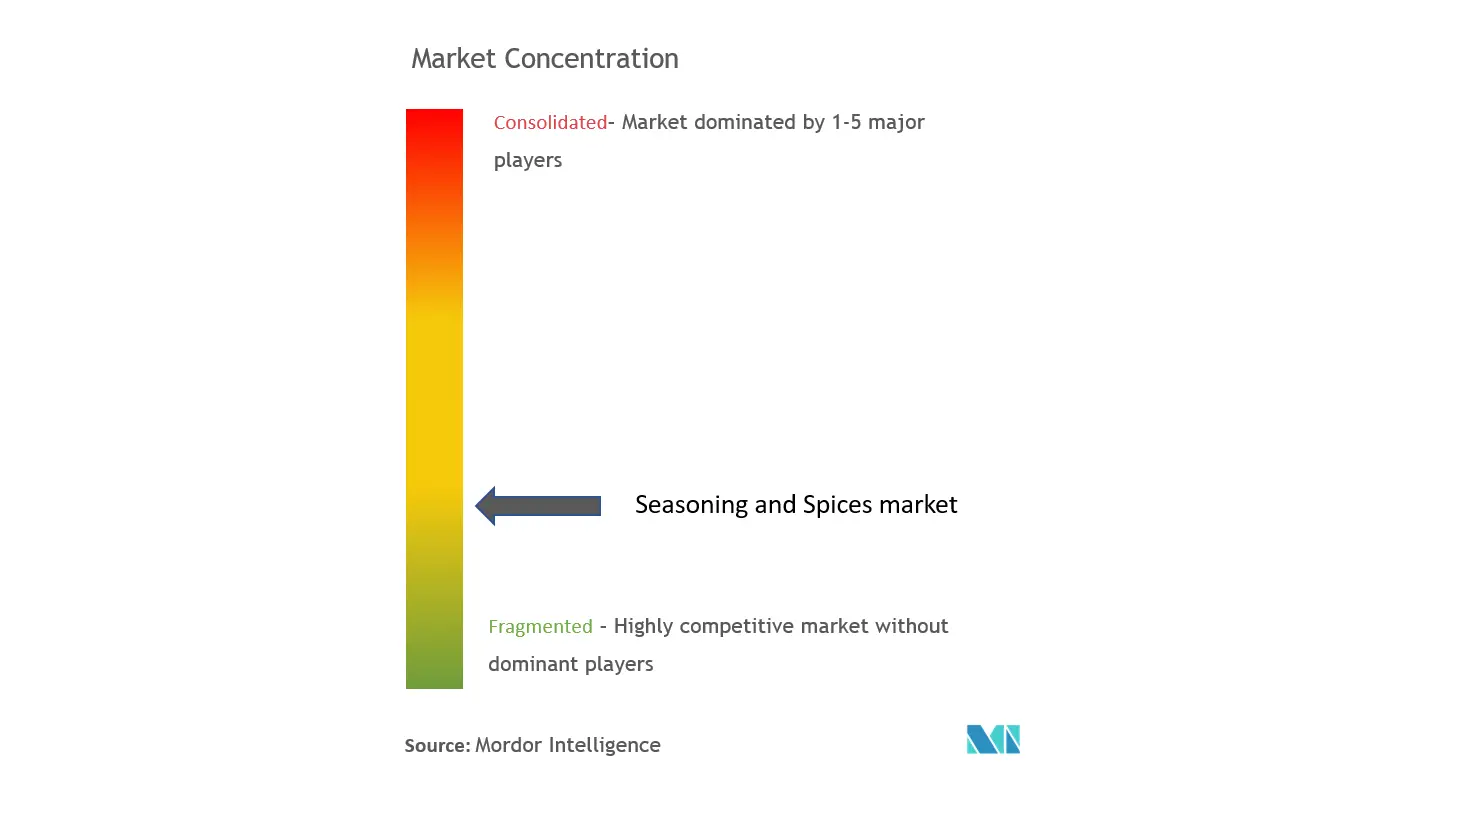 Spices And Seasoning Market Concentration